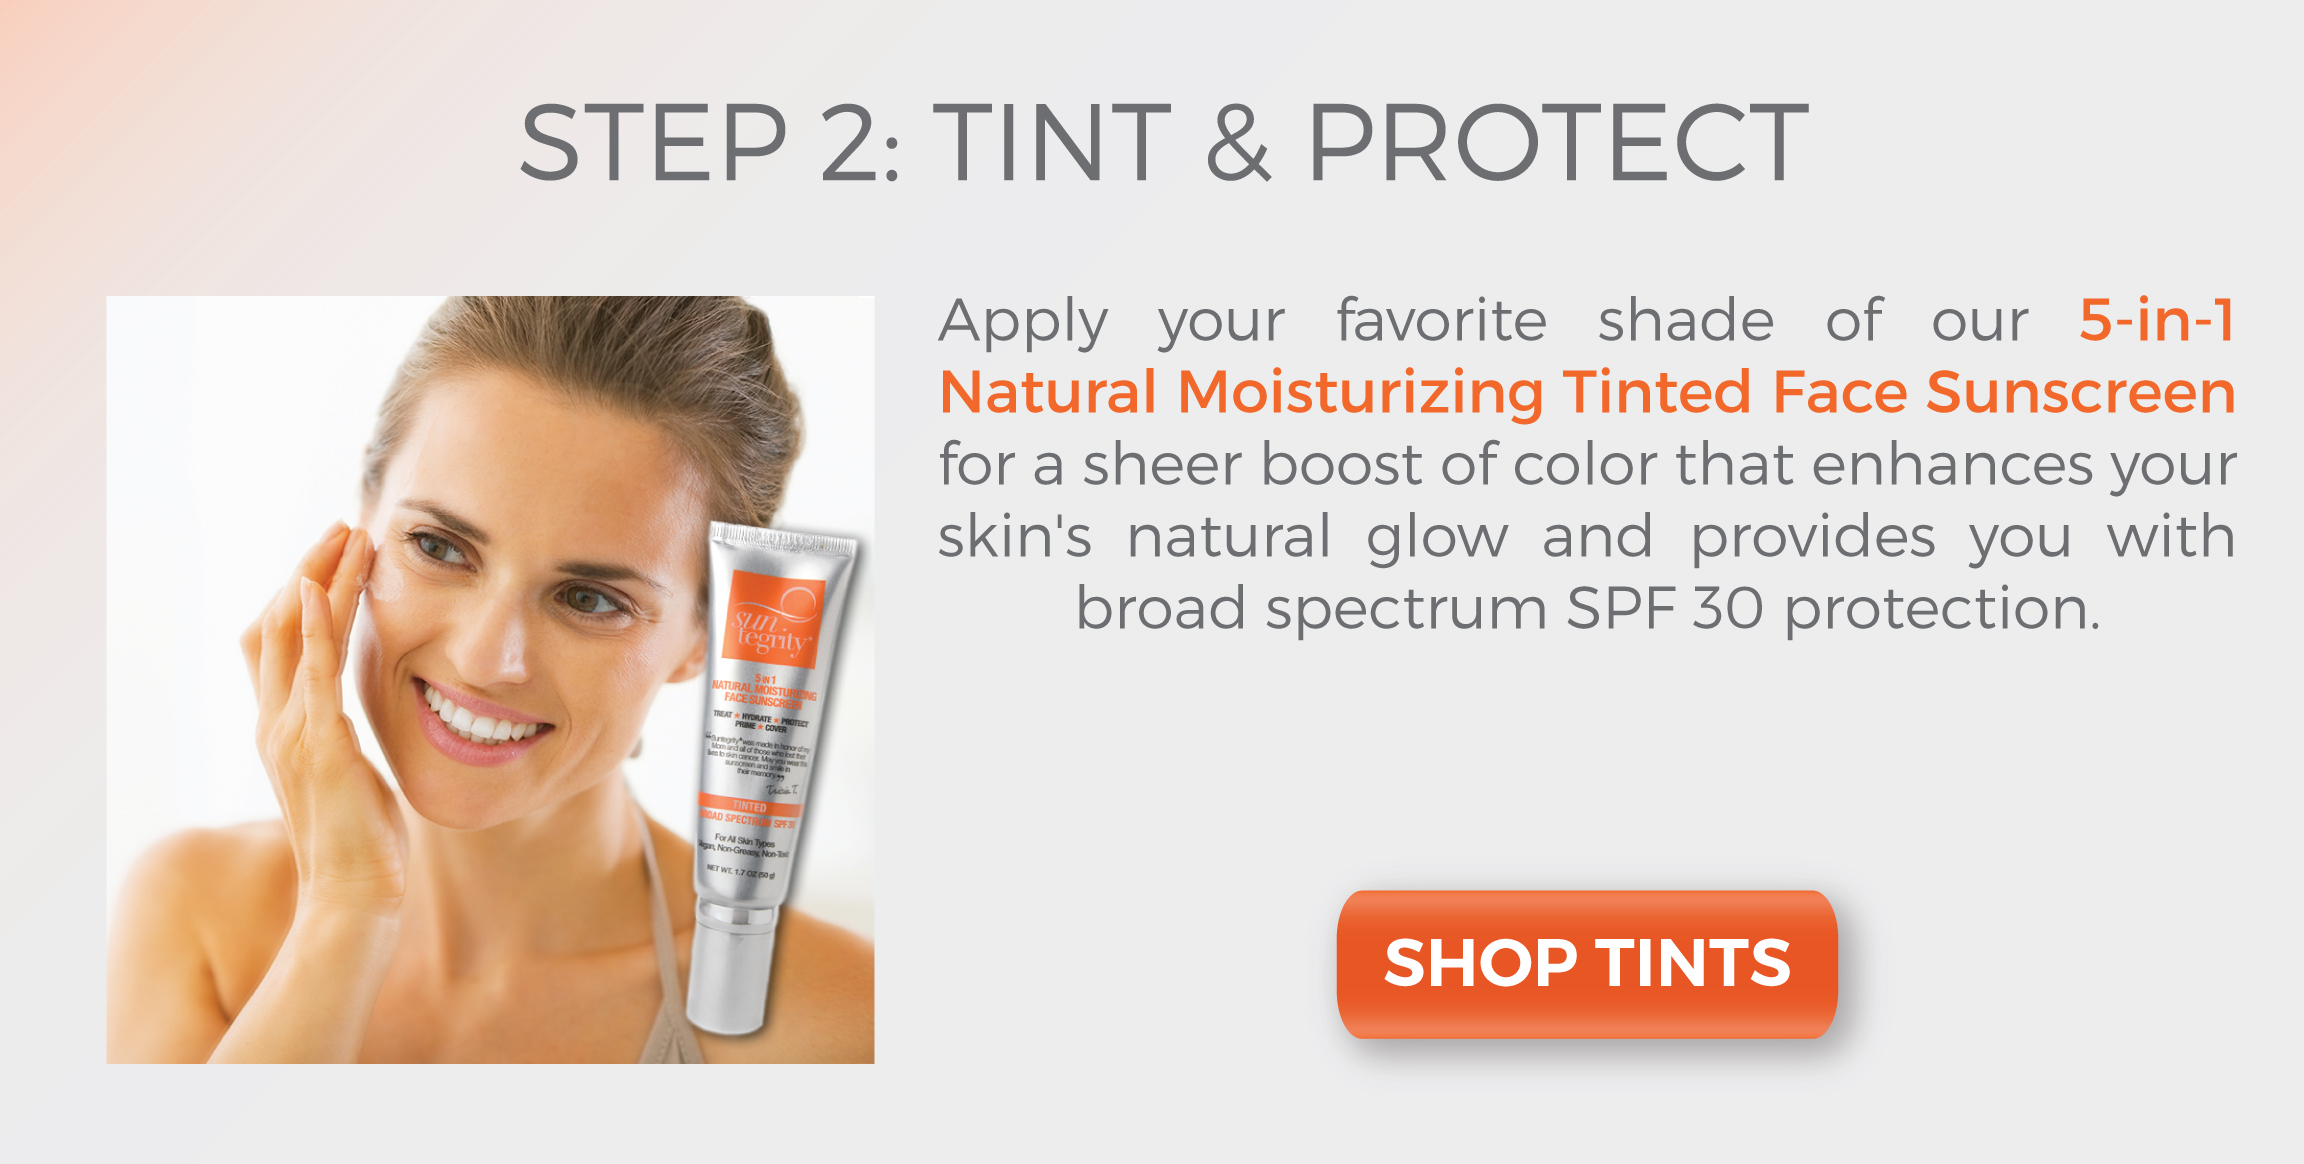 Blog - Fresh And Flawless Skin - Step 2 - Tint And Protect - Suntegrity Skincare